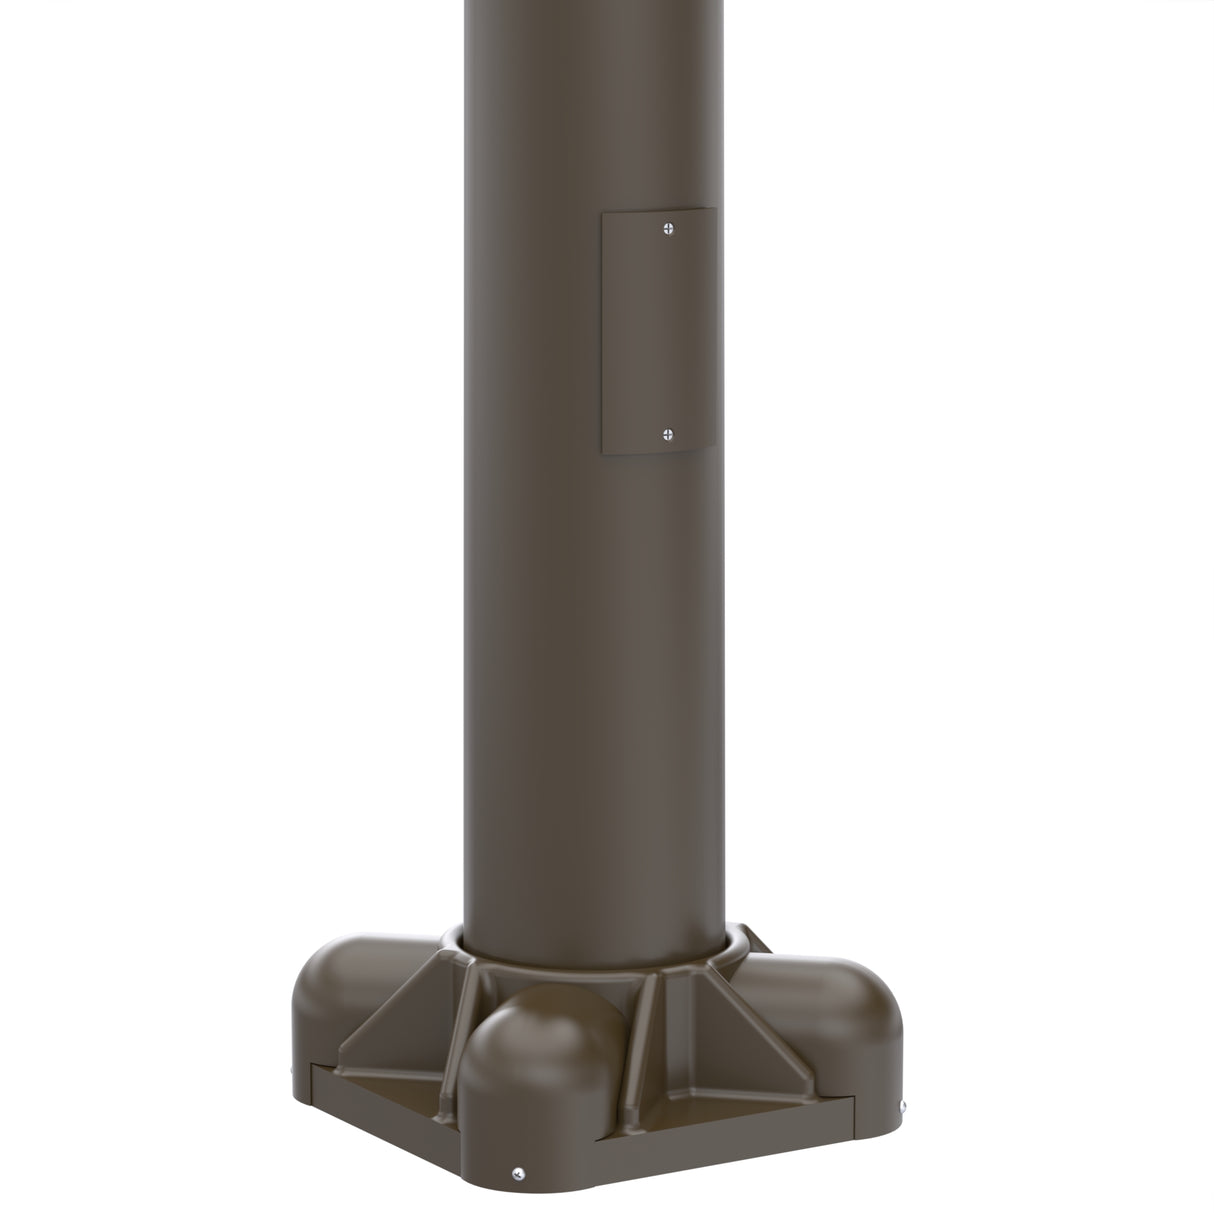 20' Tall x 5.0" Base OD x 3.0" Top OD x 0.156" Thick, Round Tapered Aluminum, Anchor Base Light Pole